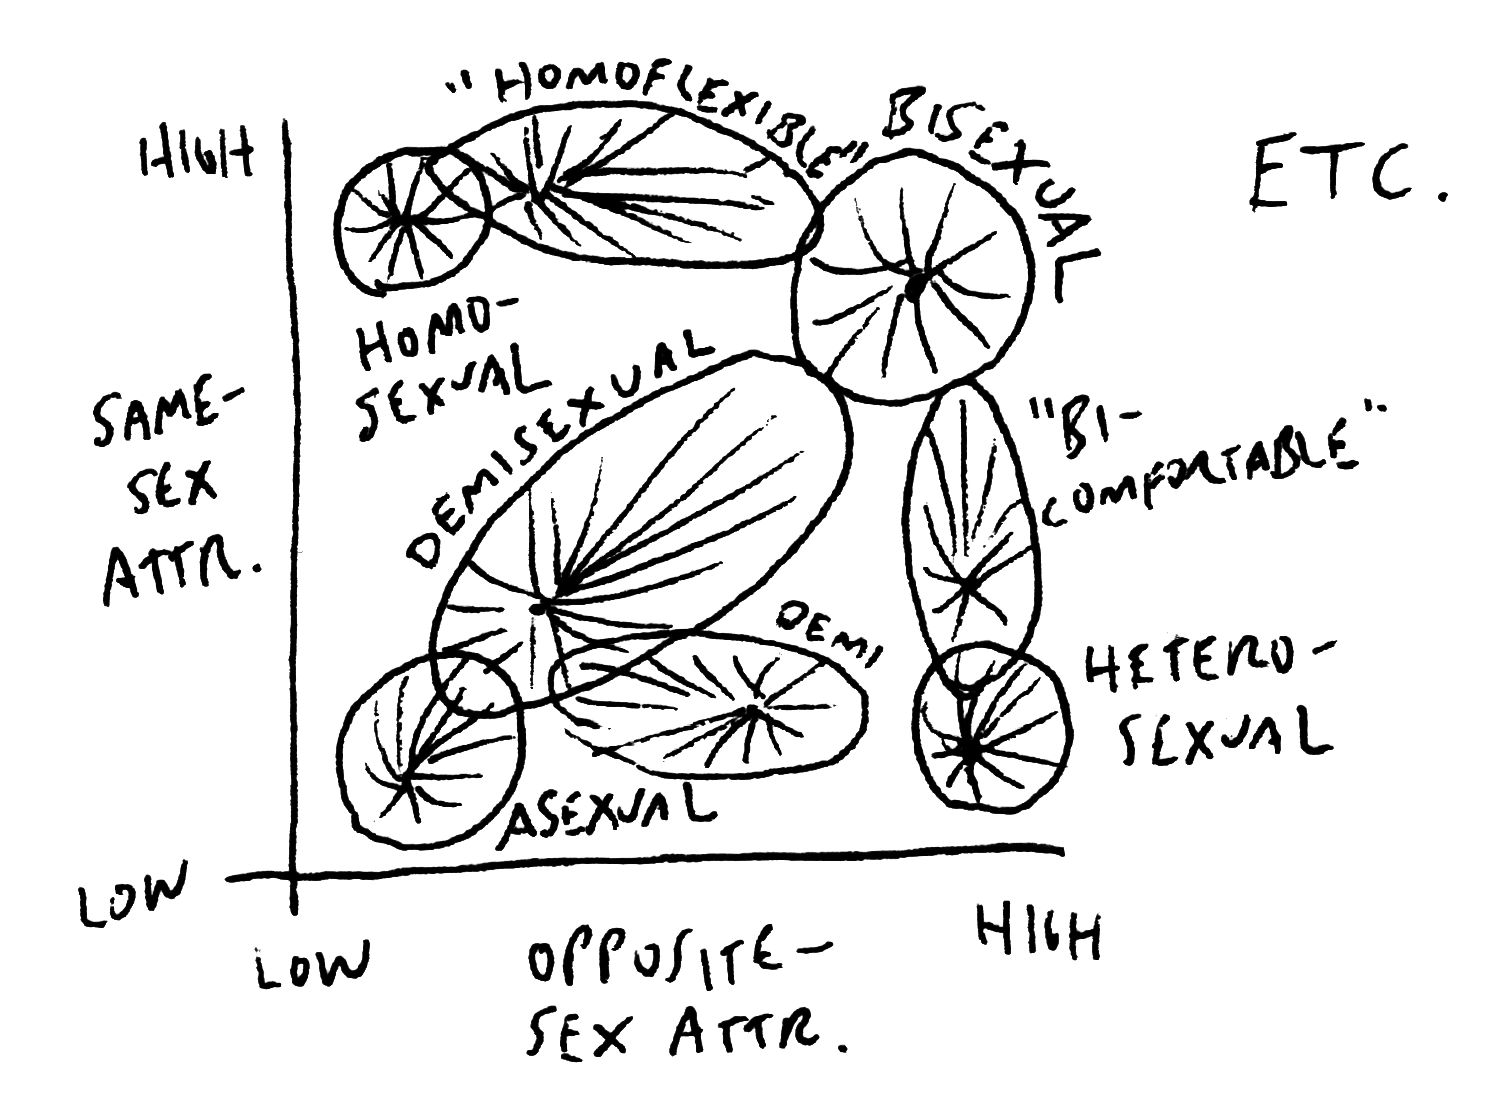 This hand-sketched diagram has two axes, same-sex attraction from low to high, and opposite-sex attraction from low to high. The plot shows the region divided into regions labeled “homoflexible,” “bisexual,” “bi-comfortable,” “heterosexual,” “demi-sexual,” and “asexual,” showing that one can loosely organize various sexual identities across the degree to which a person experiences high or low same- and opposite-sex attraction. It also indicates a spectrum from asexual to demisexual to bisexual along the diagonal.